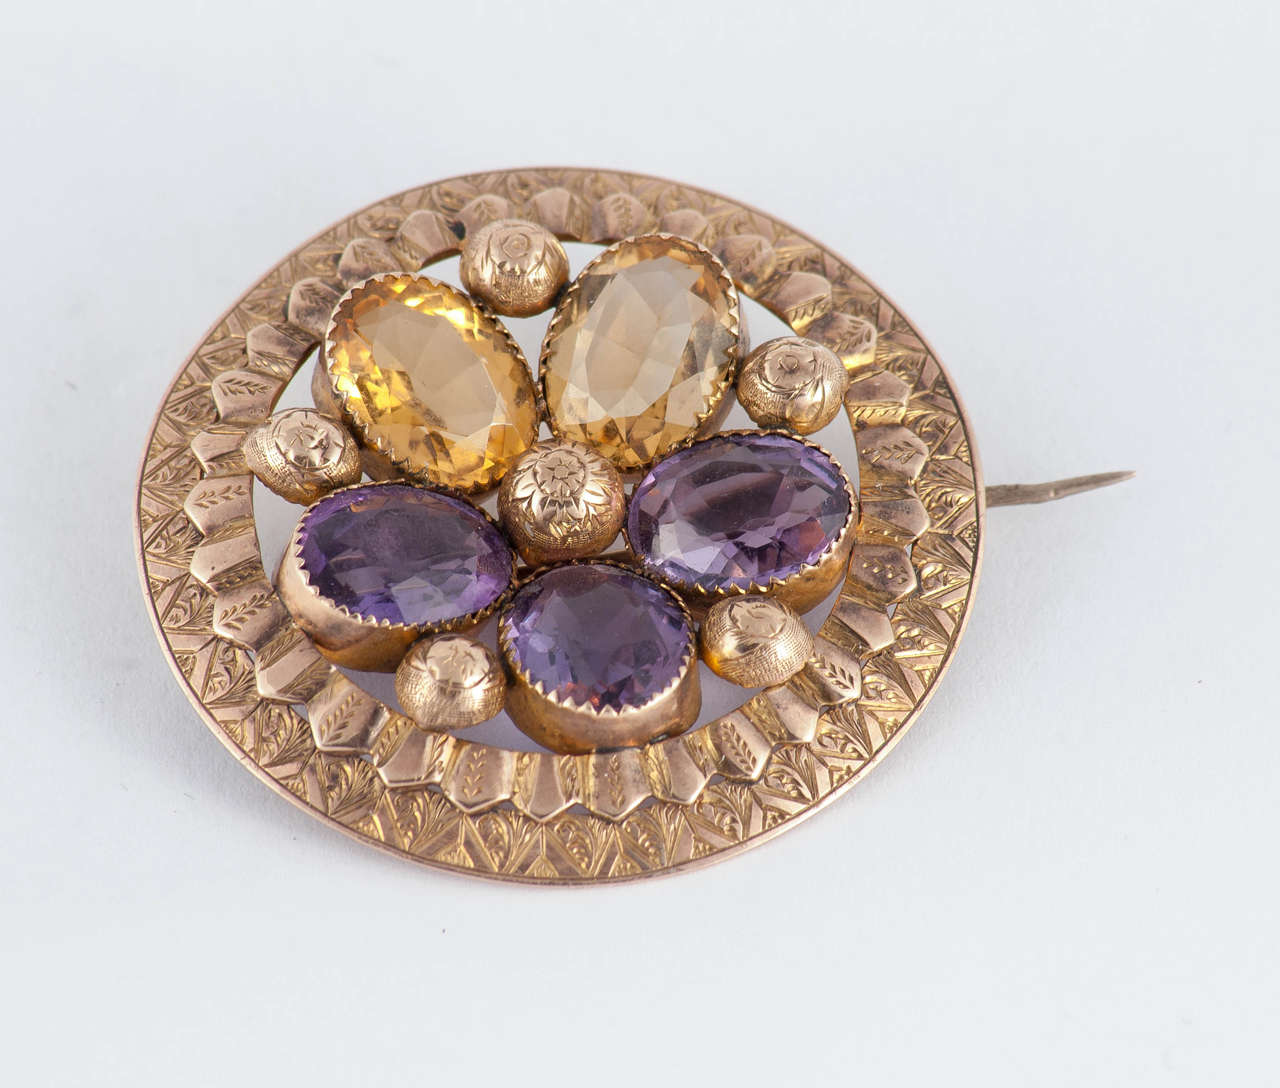 Lovely Victorian pansy pin set with amethysts and citrines in an engraved halo of 9K gold. The pansy was a popular design in Victorian jewelry as the sound of the word was similar to the French 